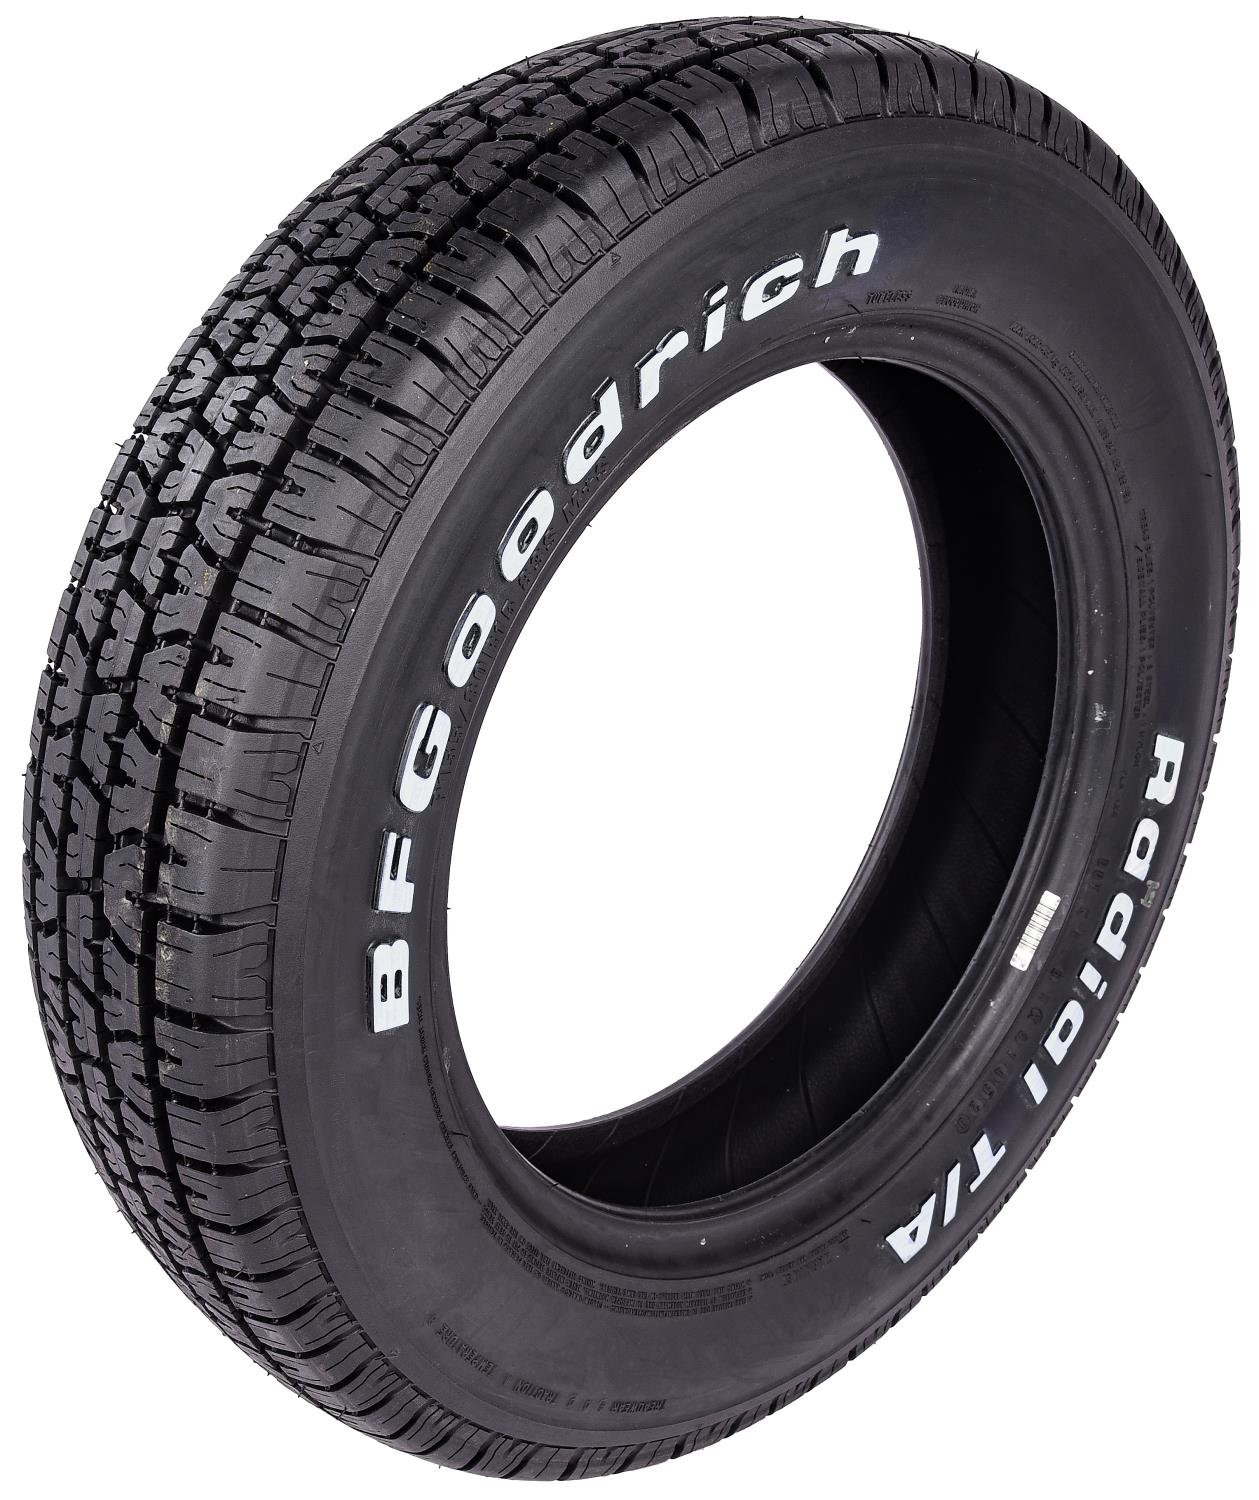 BF Goodrich 06462: Radial T/A Tire P155/80R15 - JEGS High Performance